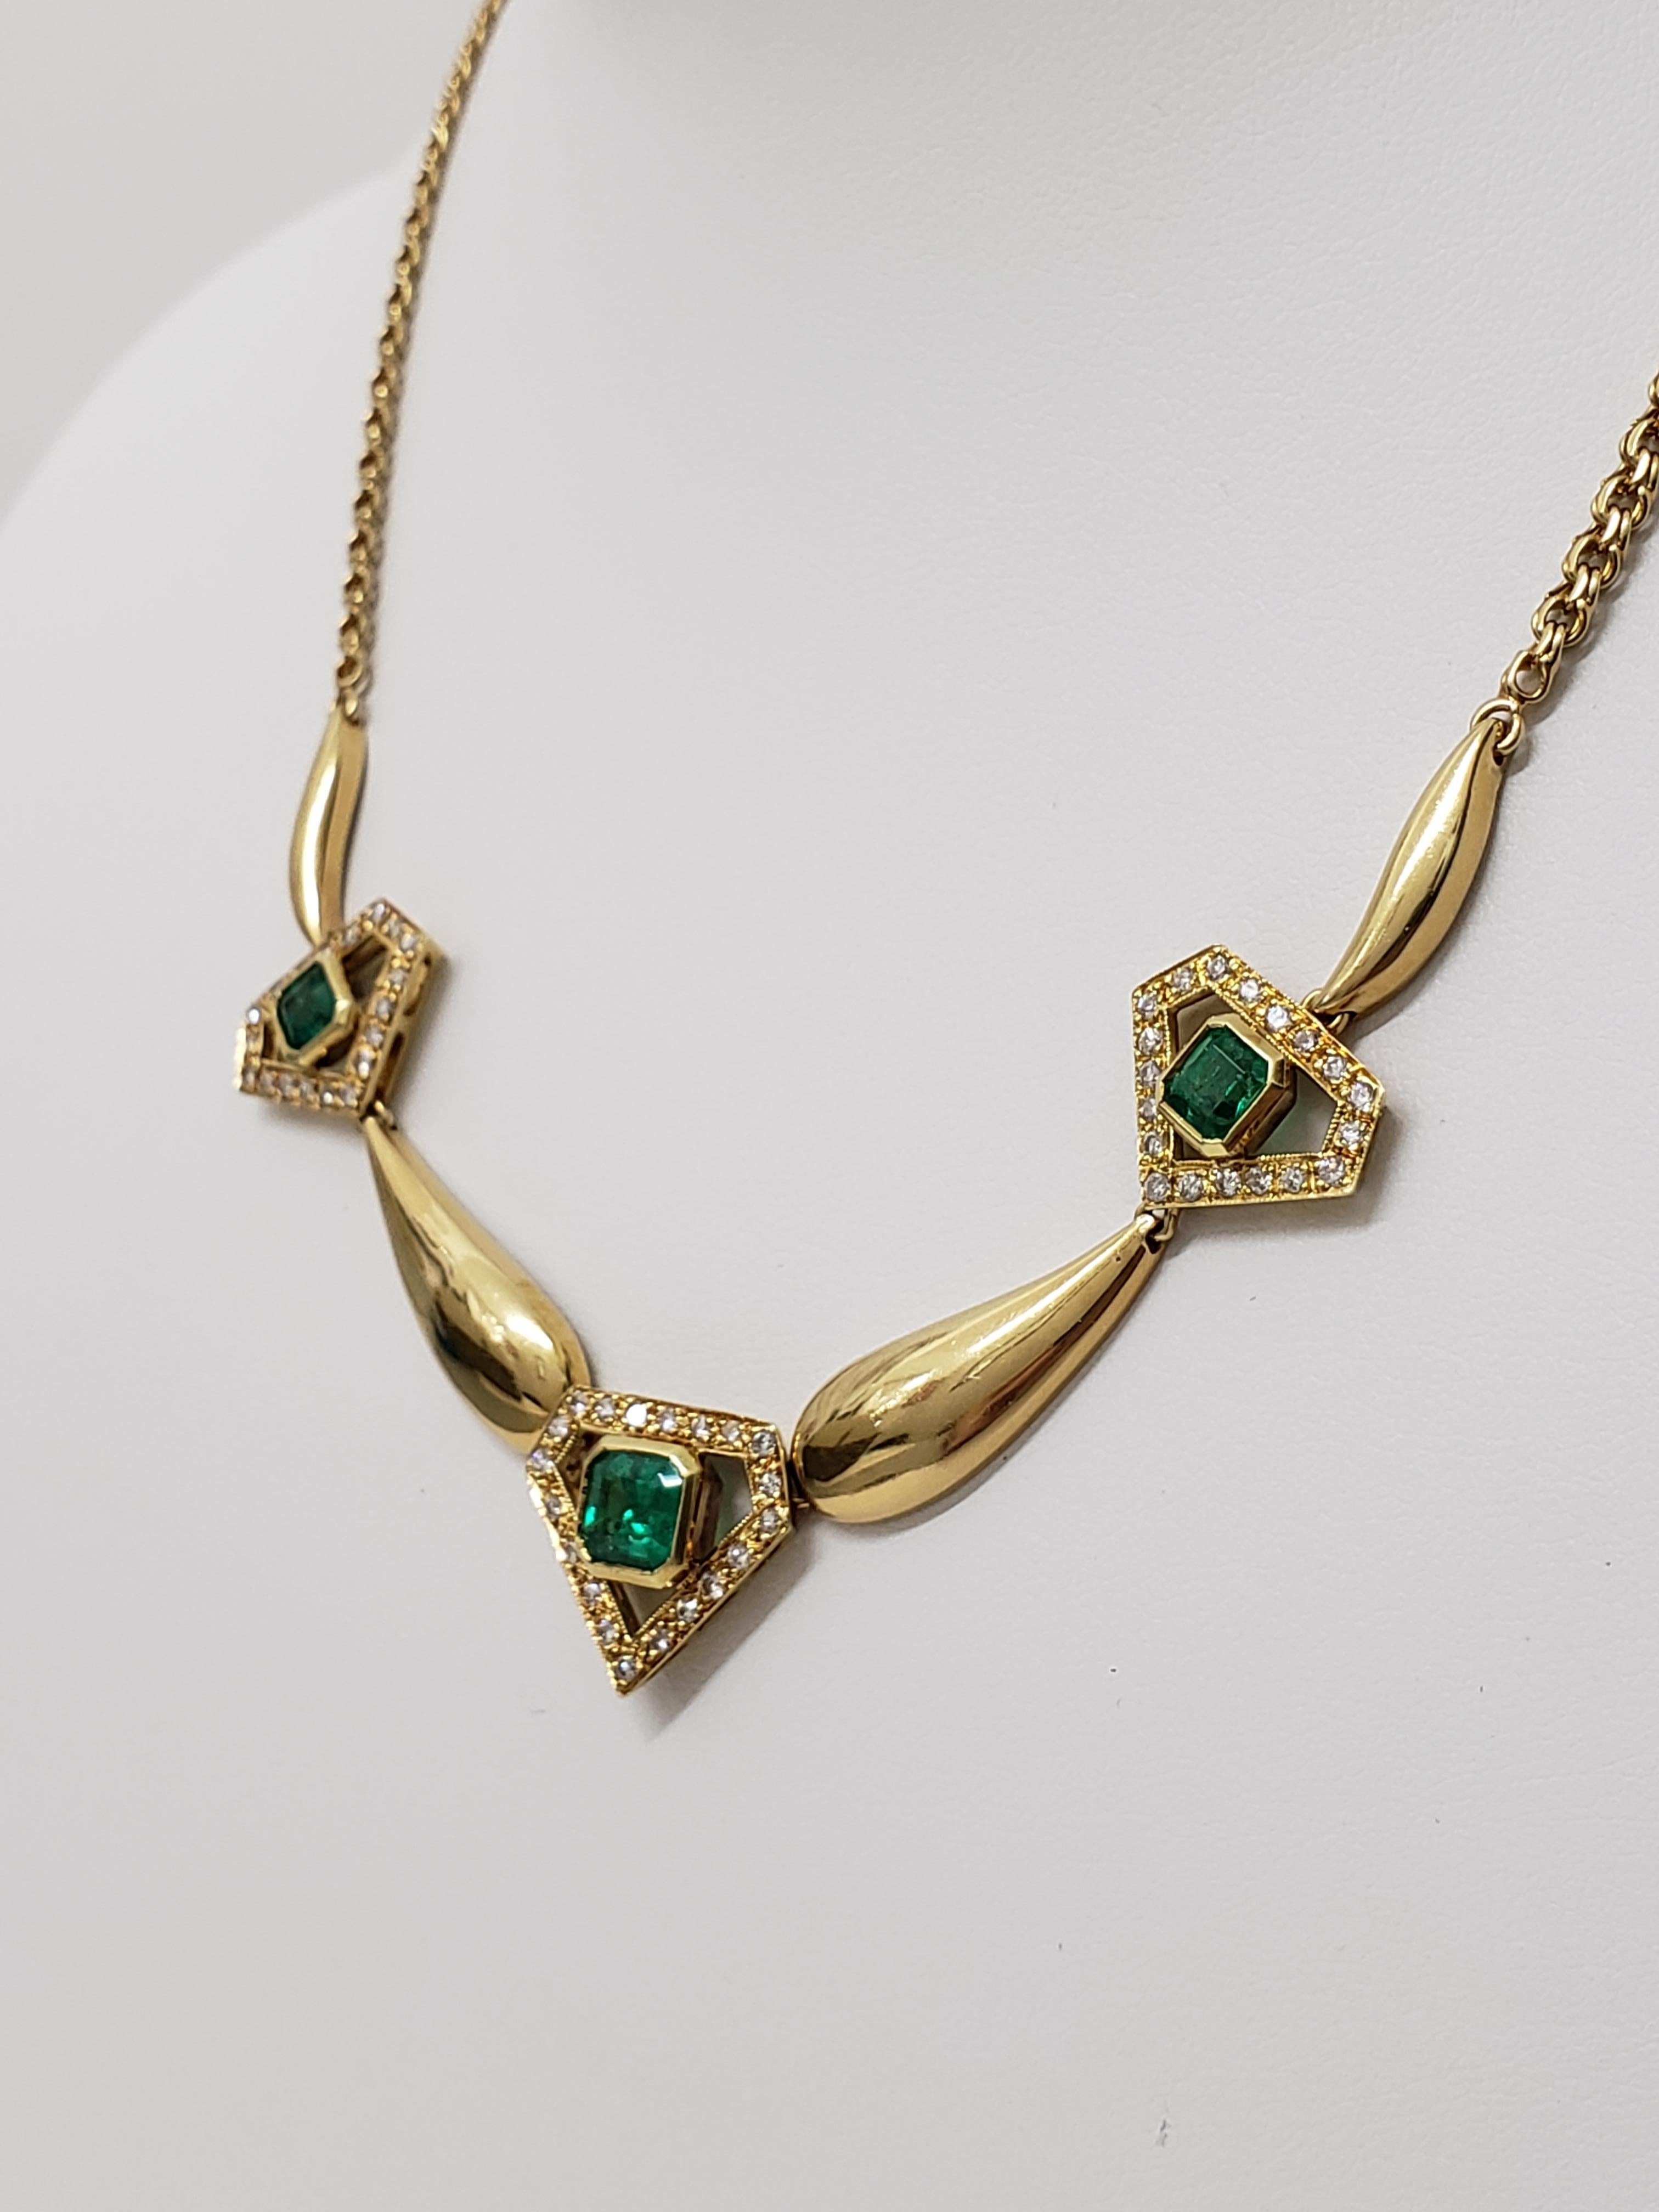 Art Deco 4.00tcw Colombian Emerald & Diamond 18k Gold Necklace. The Emeralds weight approx 2.80 carats and the diamonds weight approx 1.20 carats. The necklace weights 17.2 grams of 18k solid gold. Beautiful Diamond shape design acting as a frame to